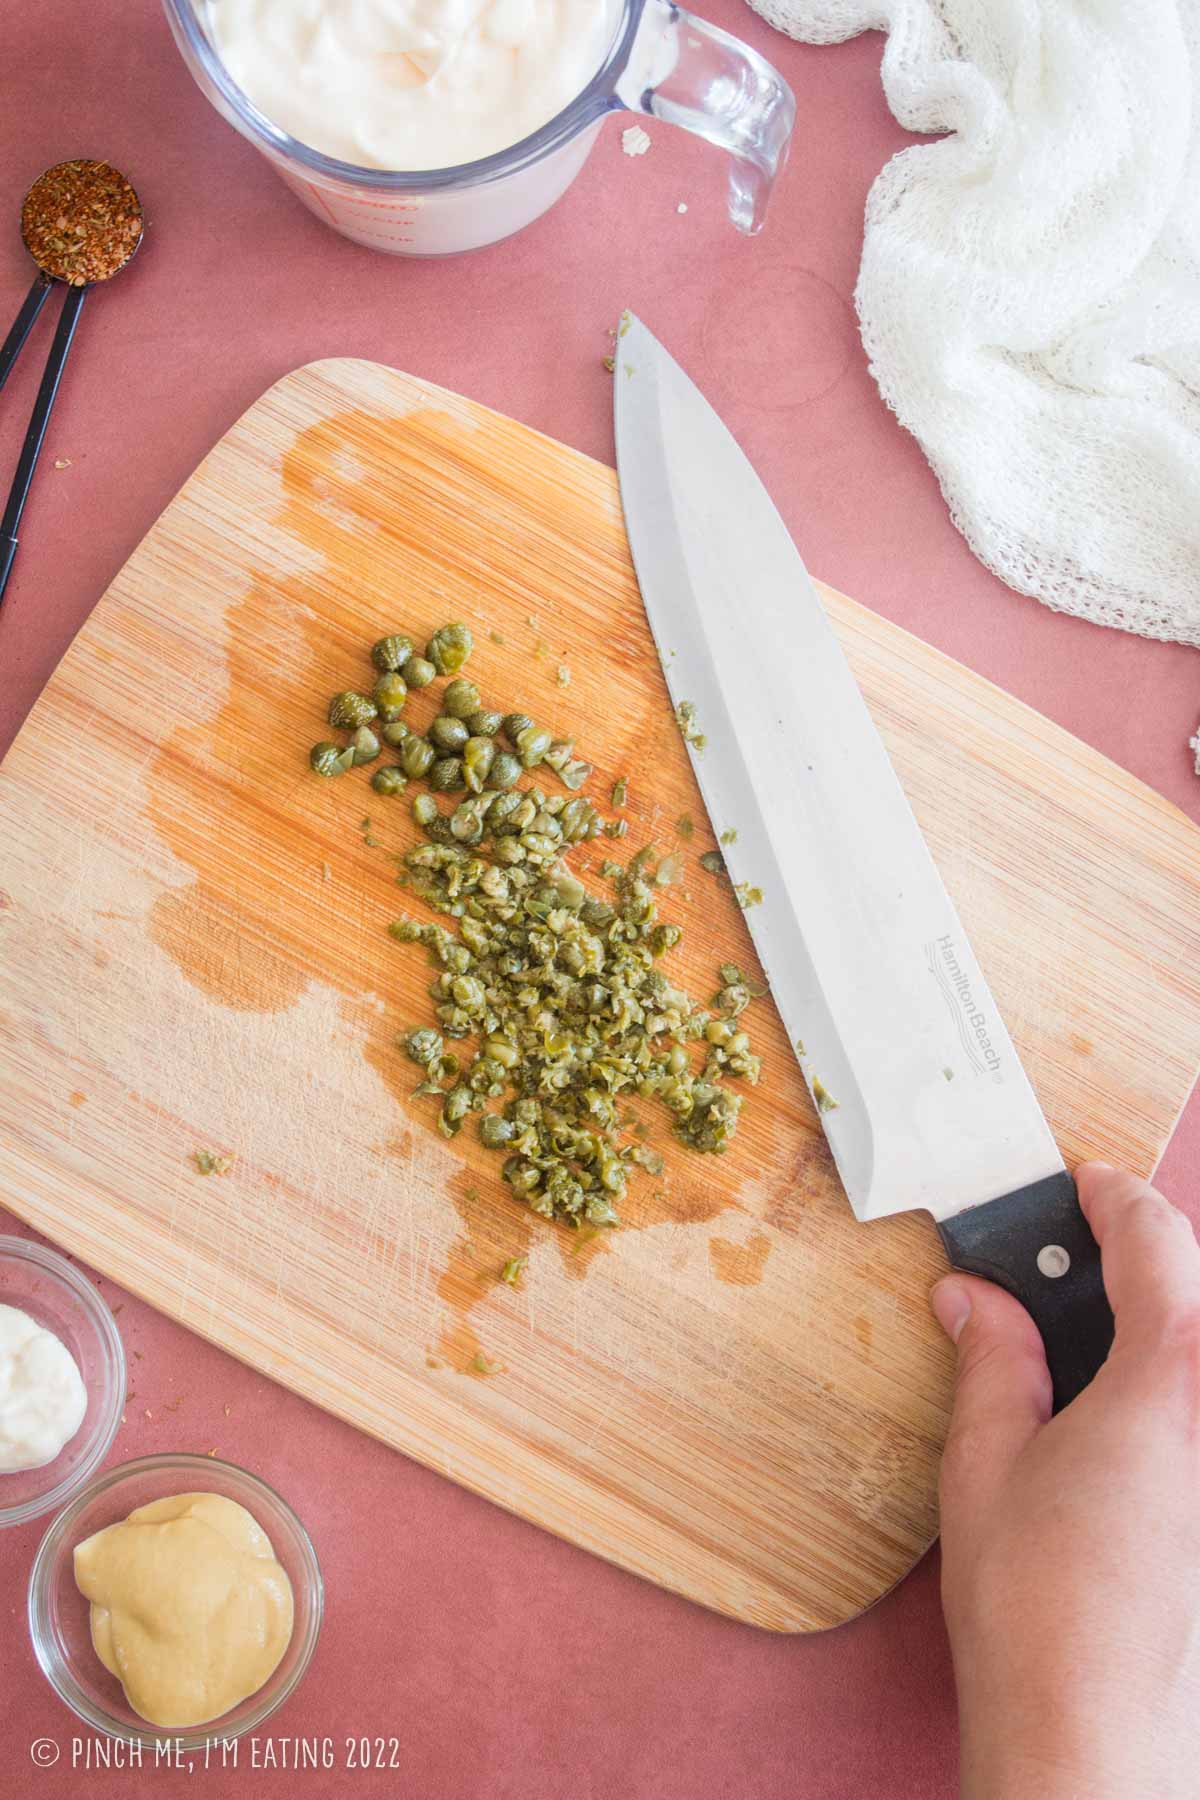 Minced capers on a wooden cutting board with a large chef's knife.